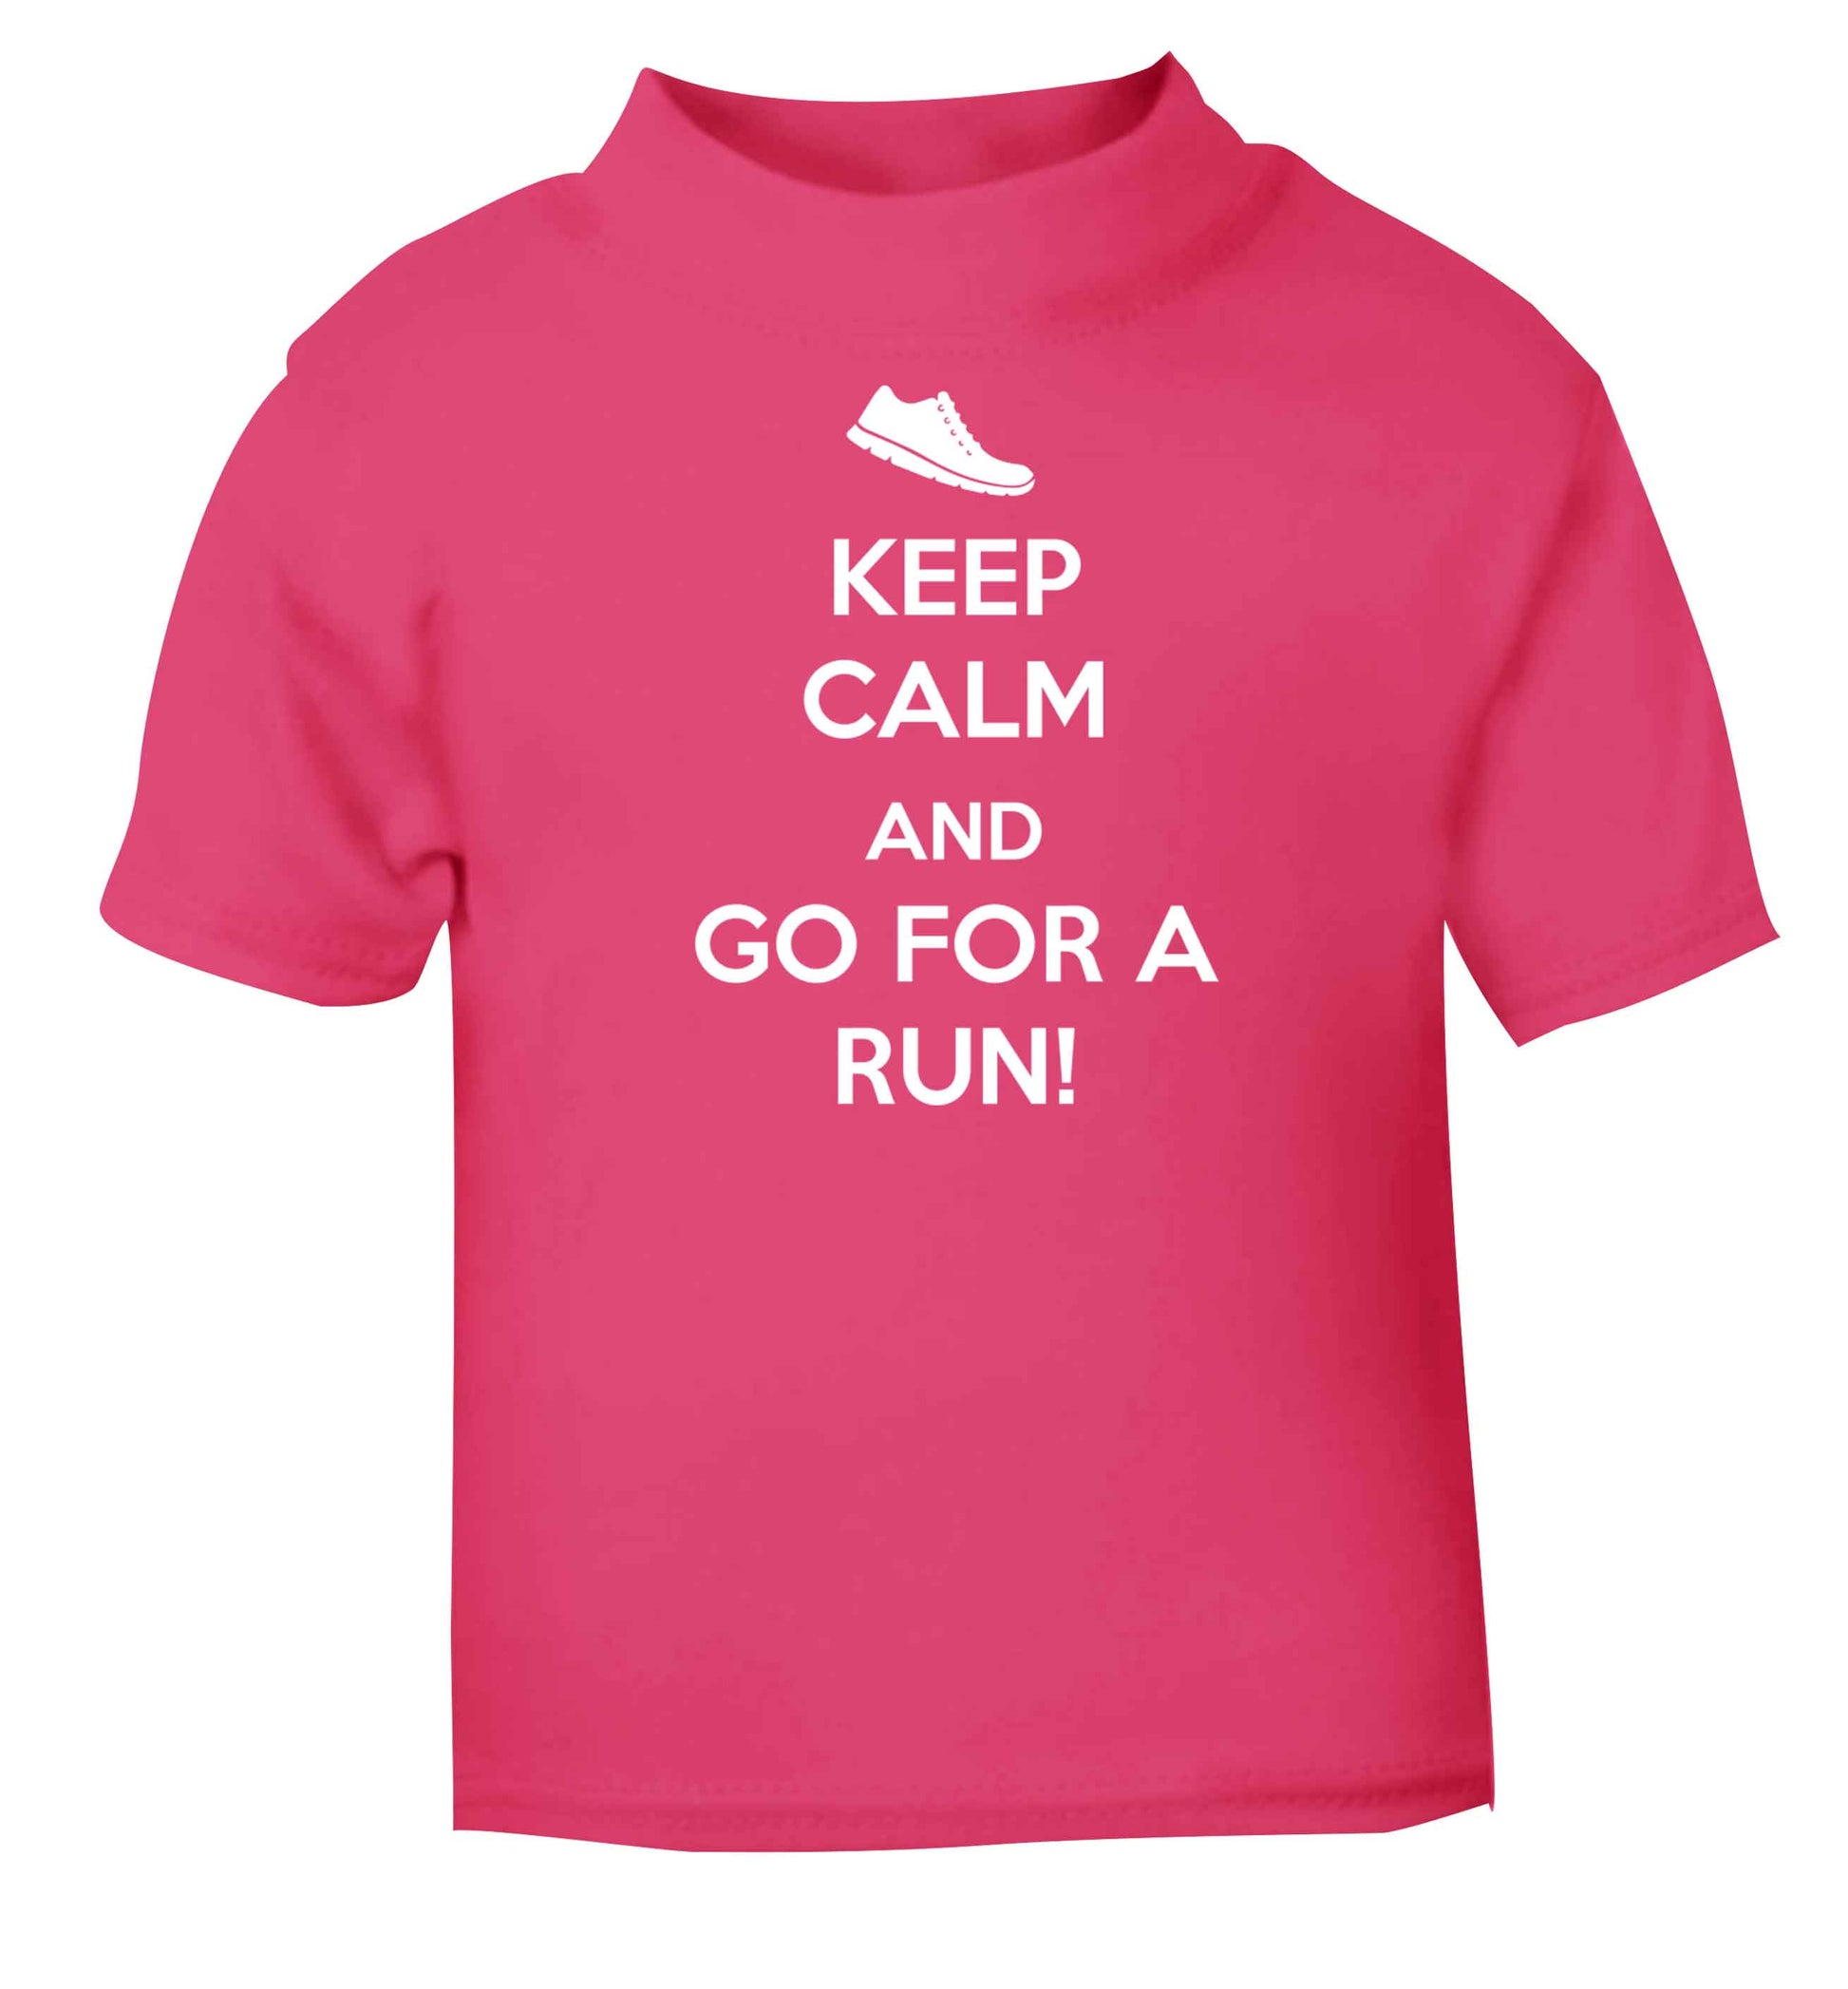 Keep calm and go for a run pink baby toddler Tshirt 2 Years